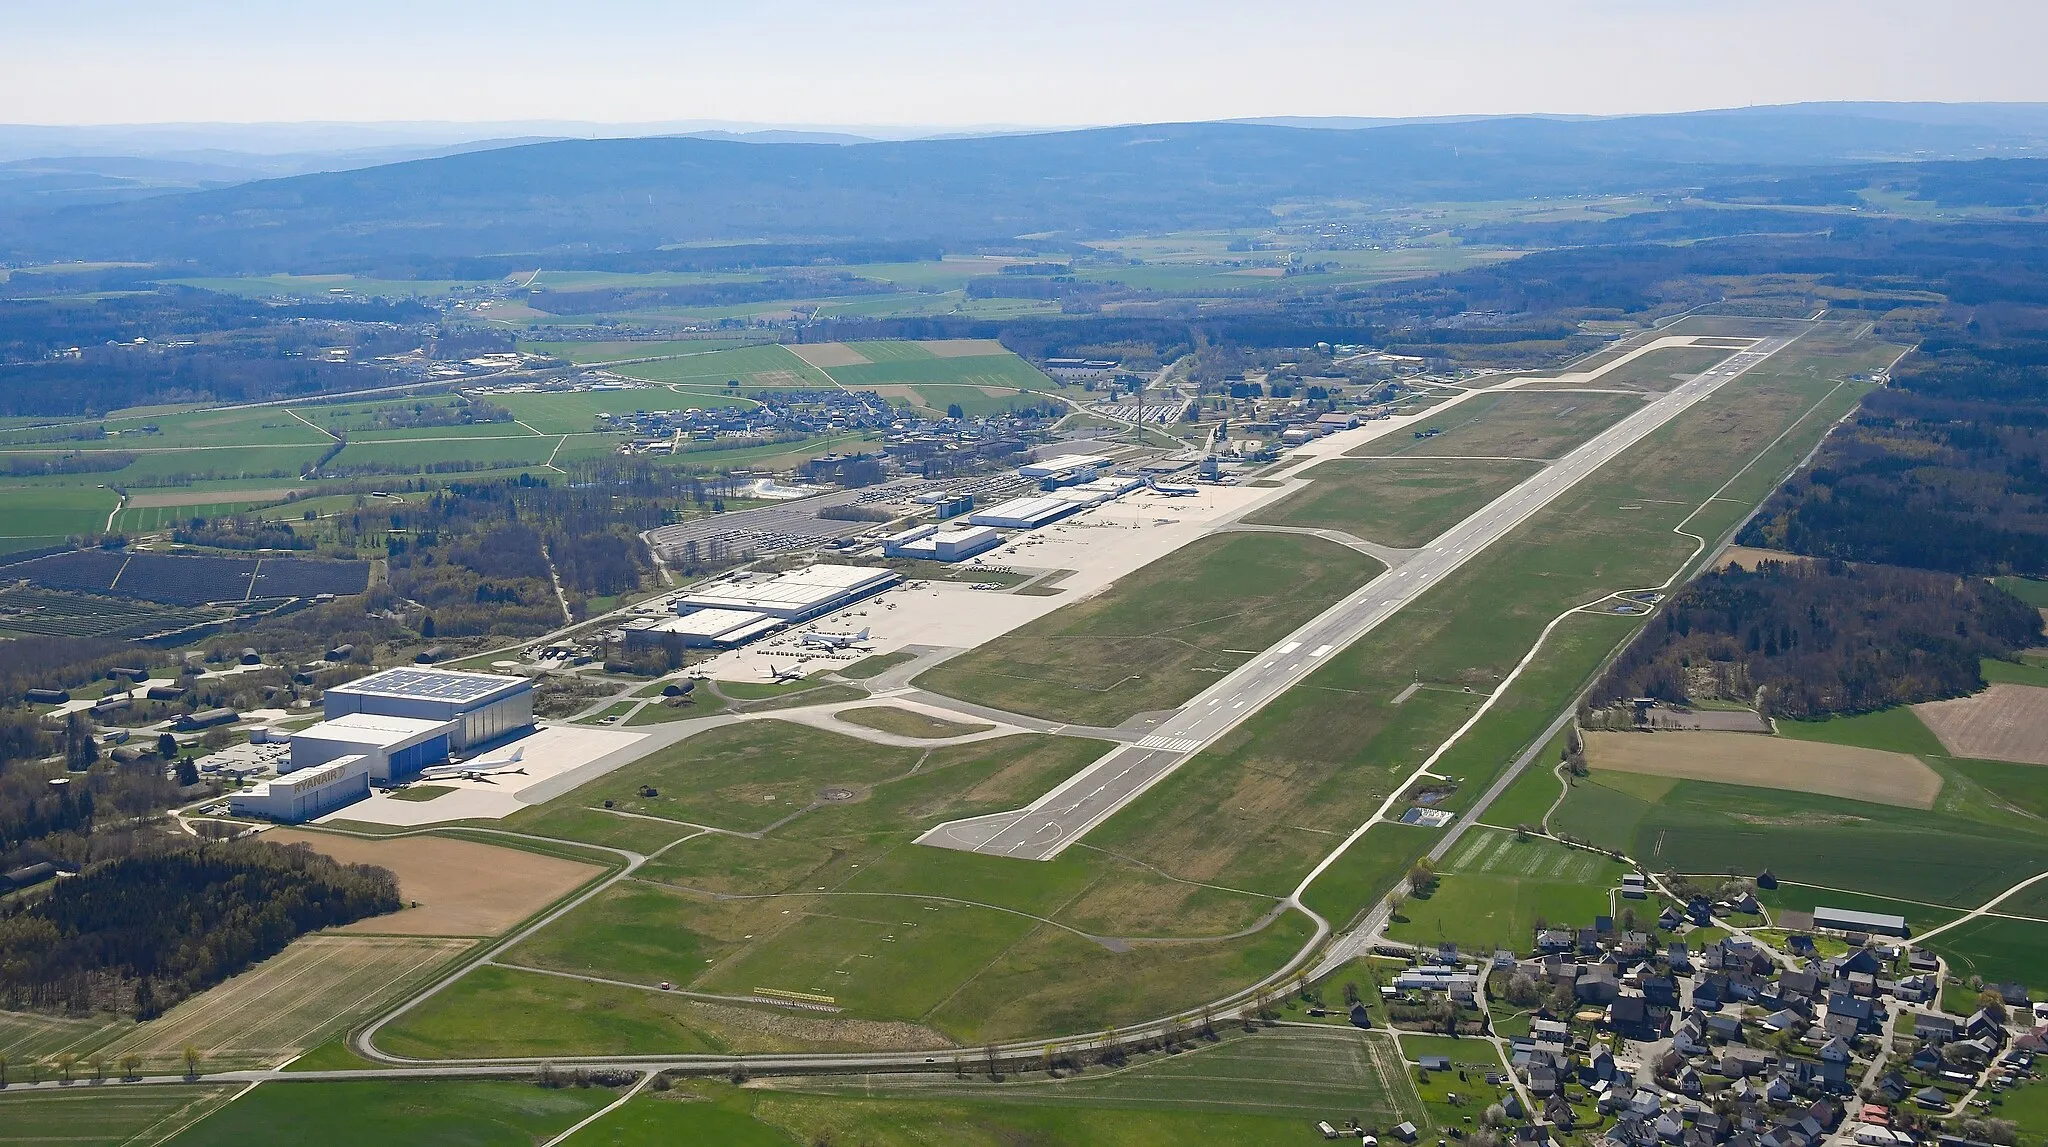 Photo showing: Aerial image of the Frankfurt-Hahn airport